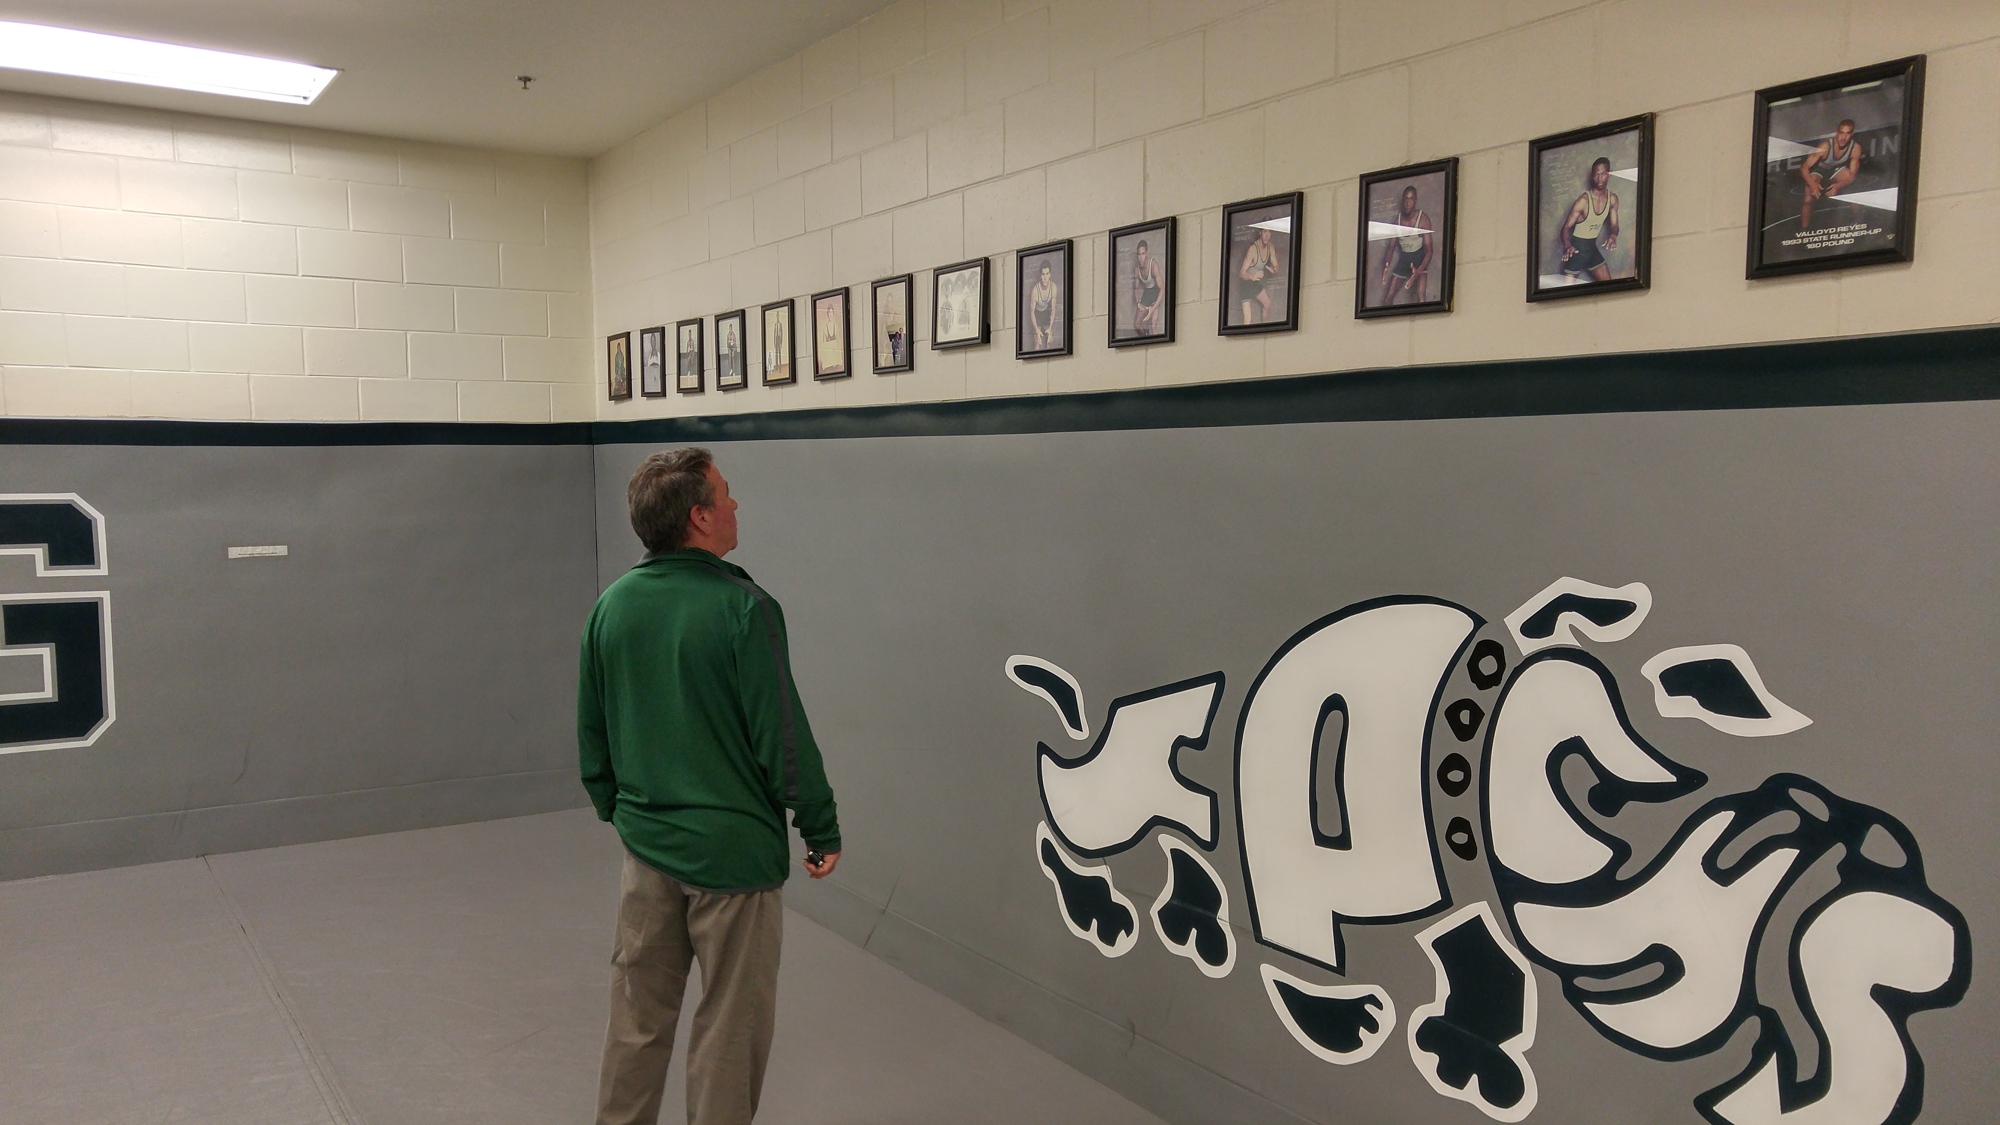 Steve DeAugustino strolls down memory lane in FPC's wrestling room. Photo by Brent Woronoff